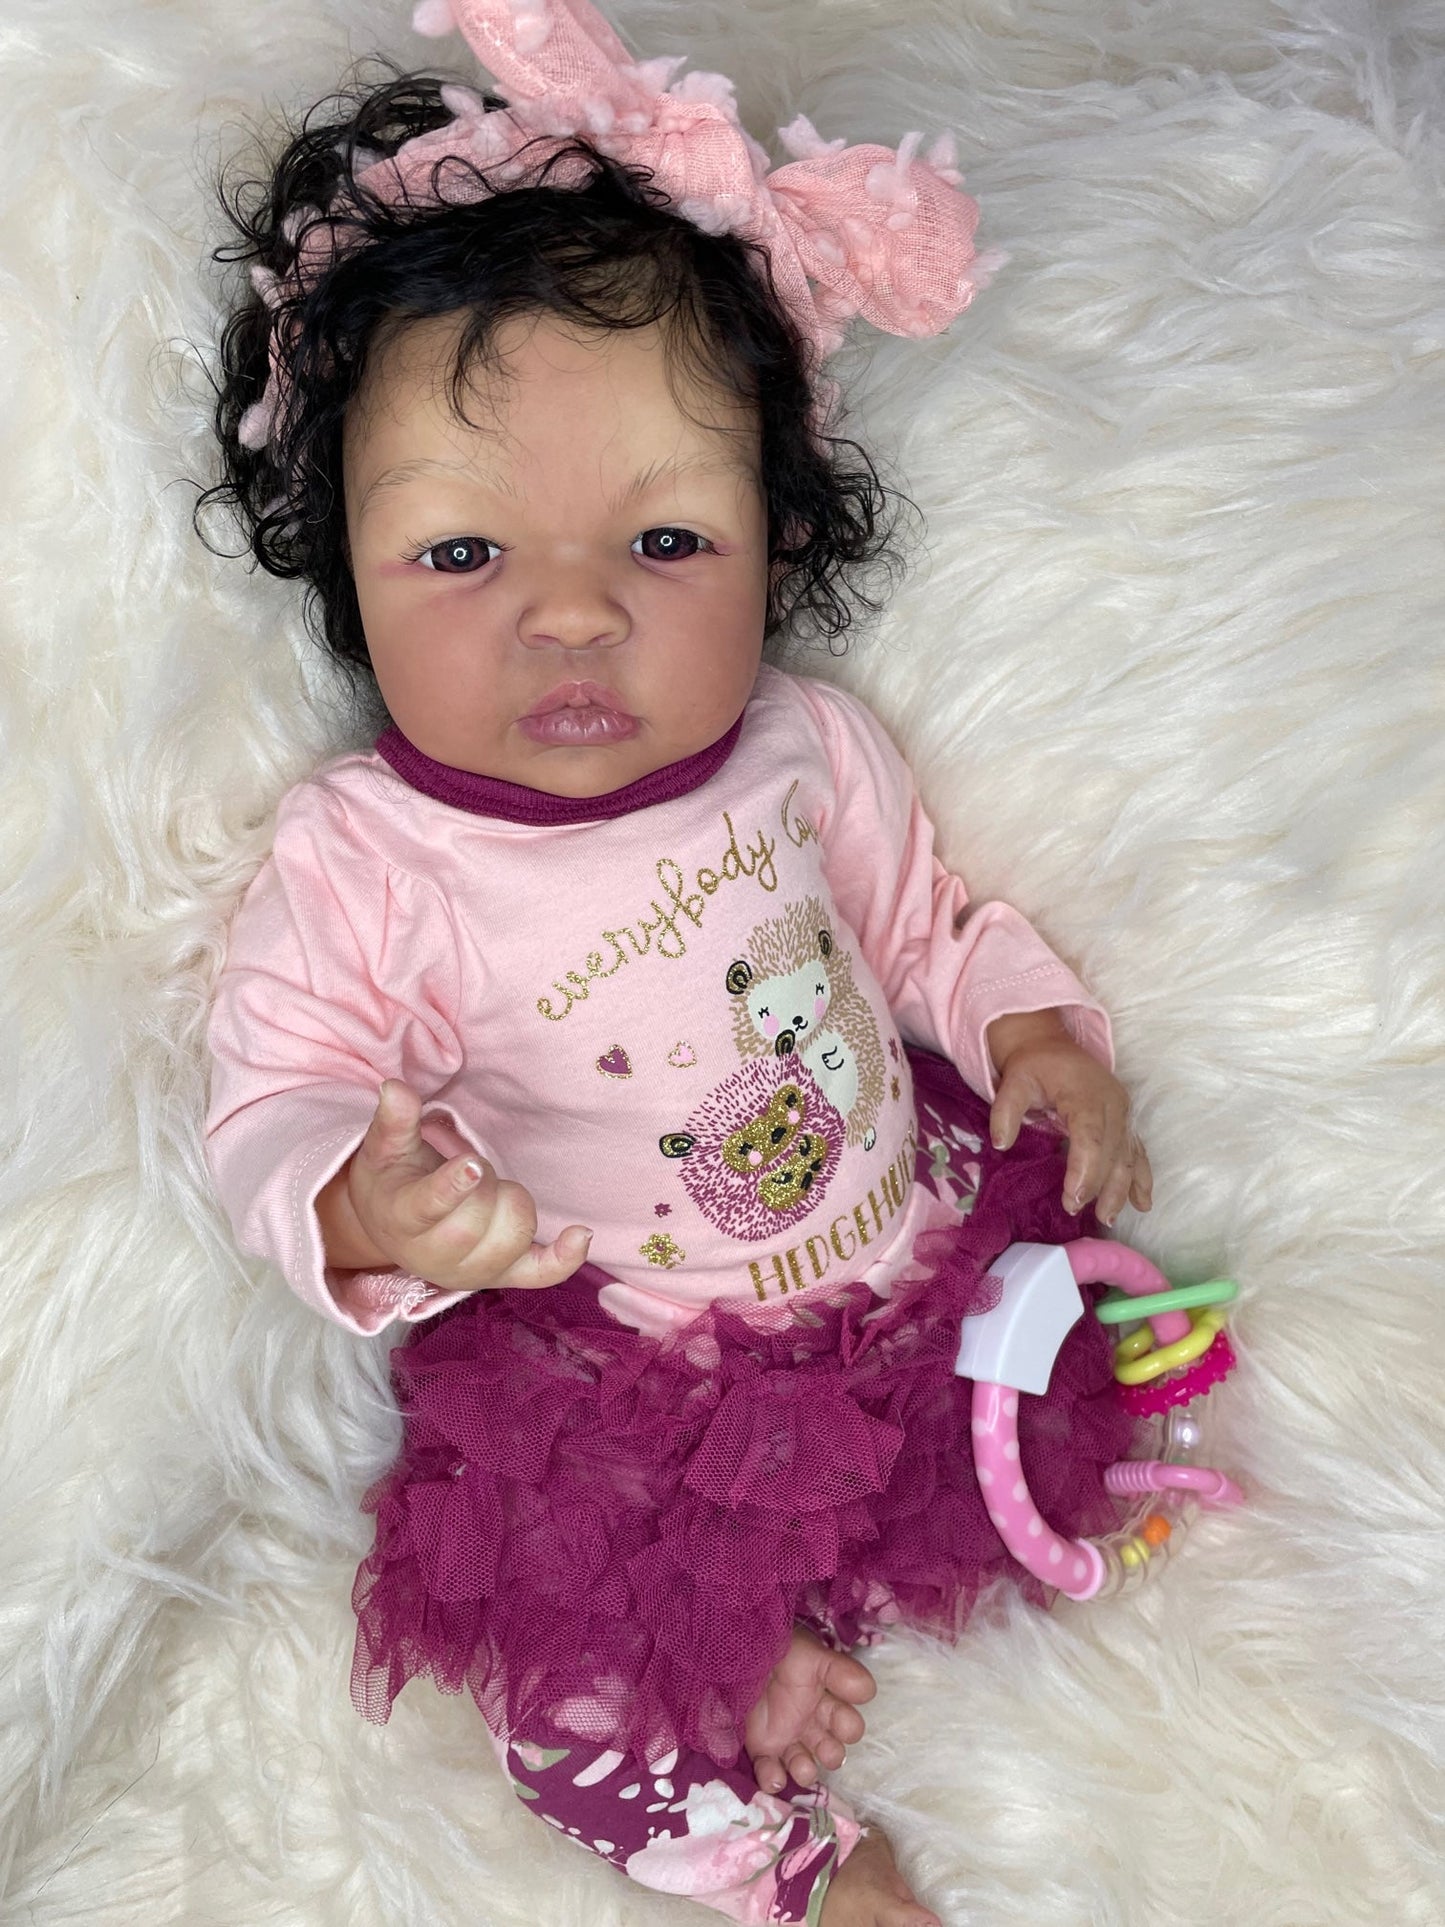 Realistic reborn baby for sale and ready to ship